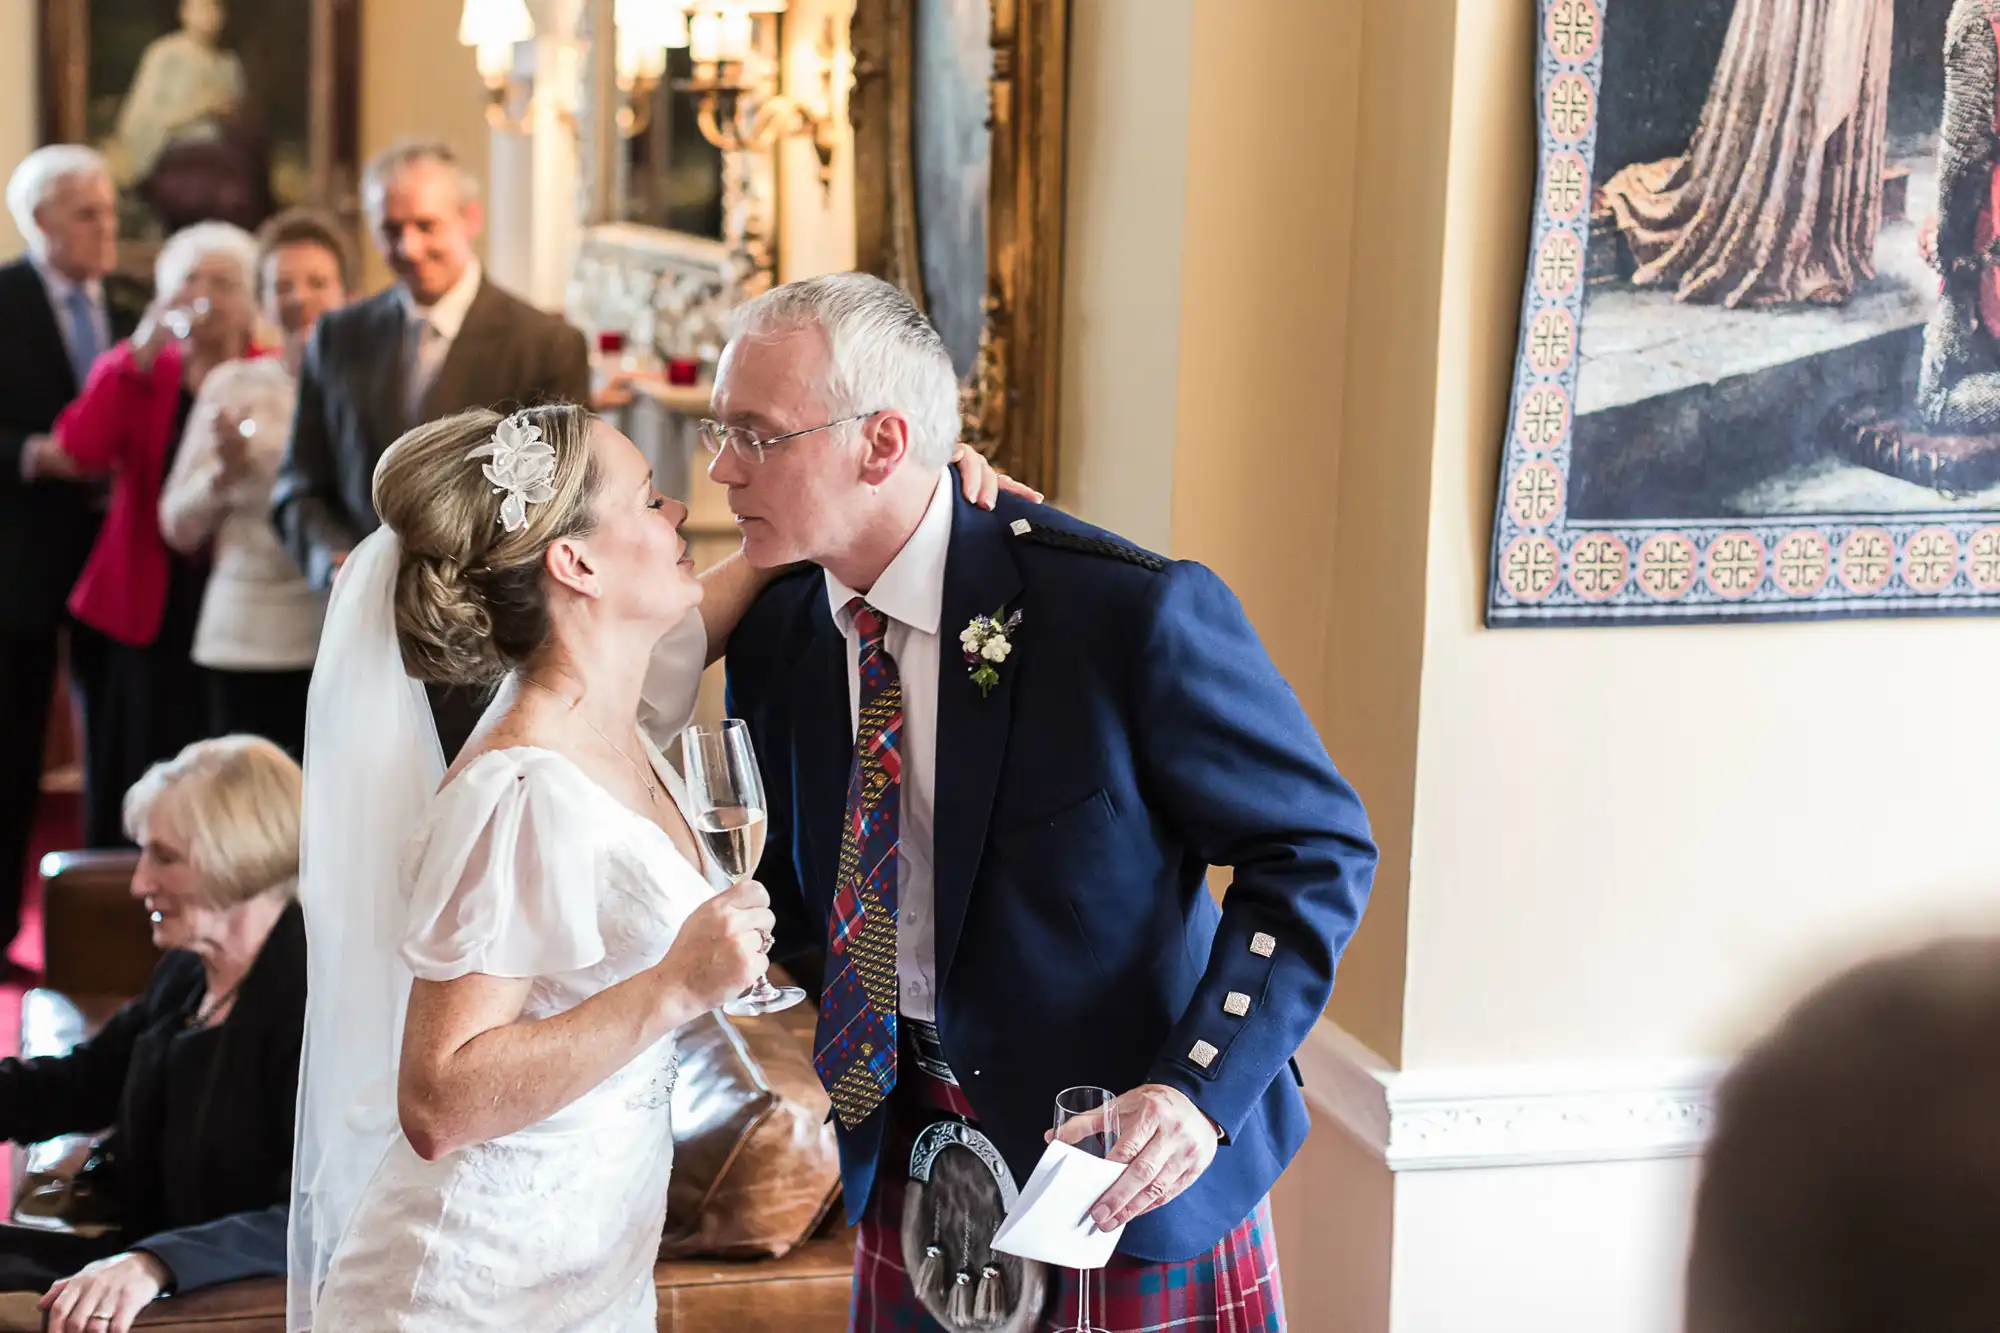 A bride and groom, dressed in a white gown and scottish kilt, respectively, sharing a kiss while holding wine glasses at their wedding reception.